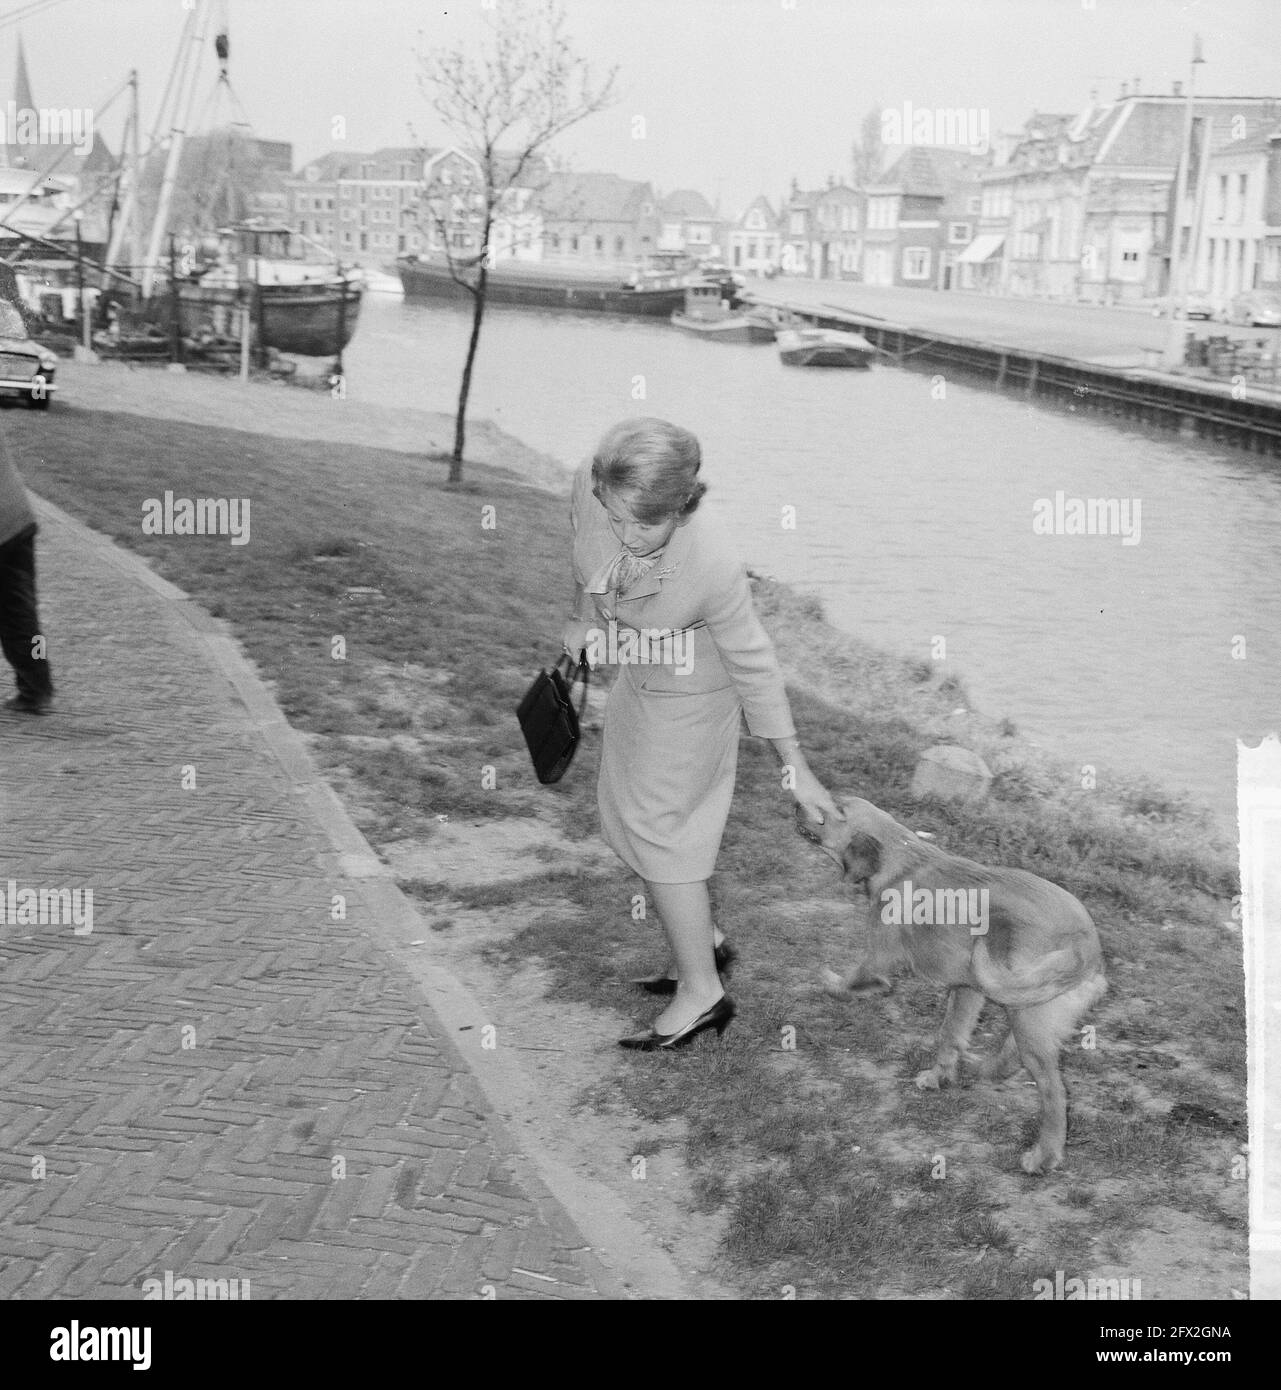 Princess Beatrix meeting attended in the Dromedaris Enkhuizen, the Princess with dog, May 9, 1964, princesses, The Netherlands, 20th century press agency photo, news to remember, documentary, historic photography 1945-1990, visual stories, human history of the Twentieth Century, capturing moments in time Stock Photo